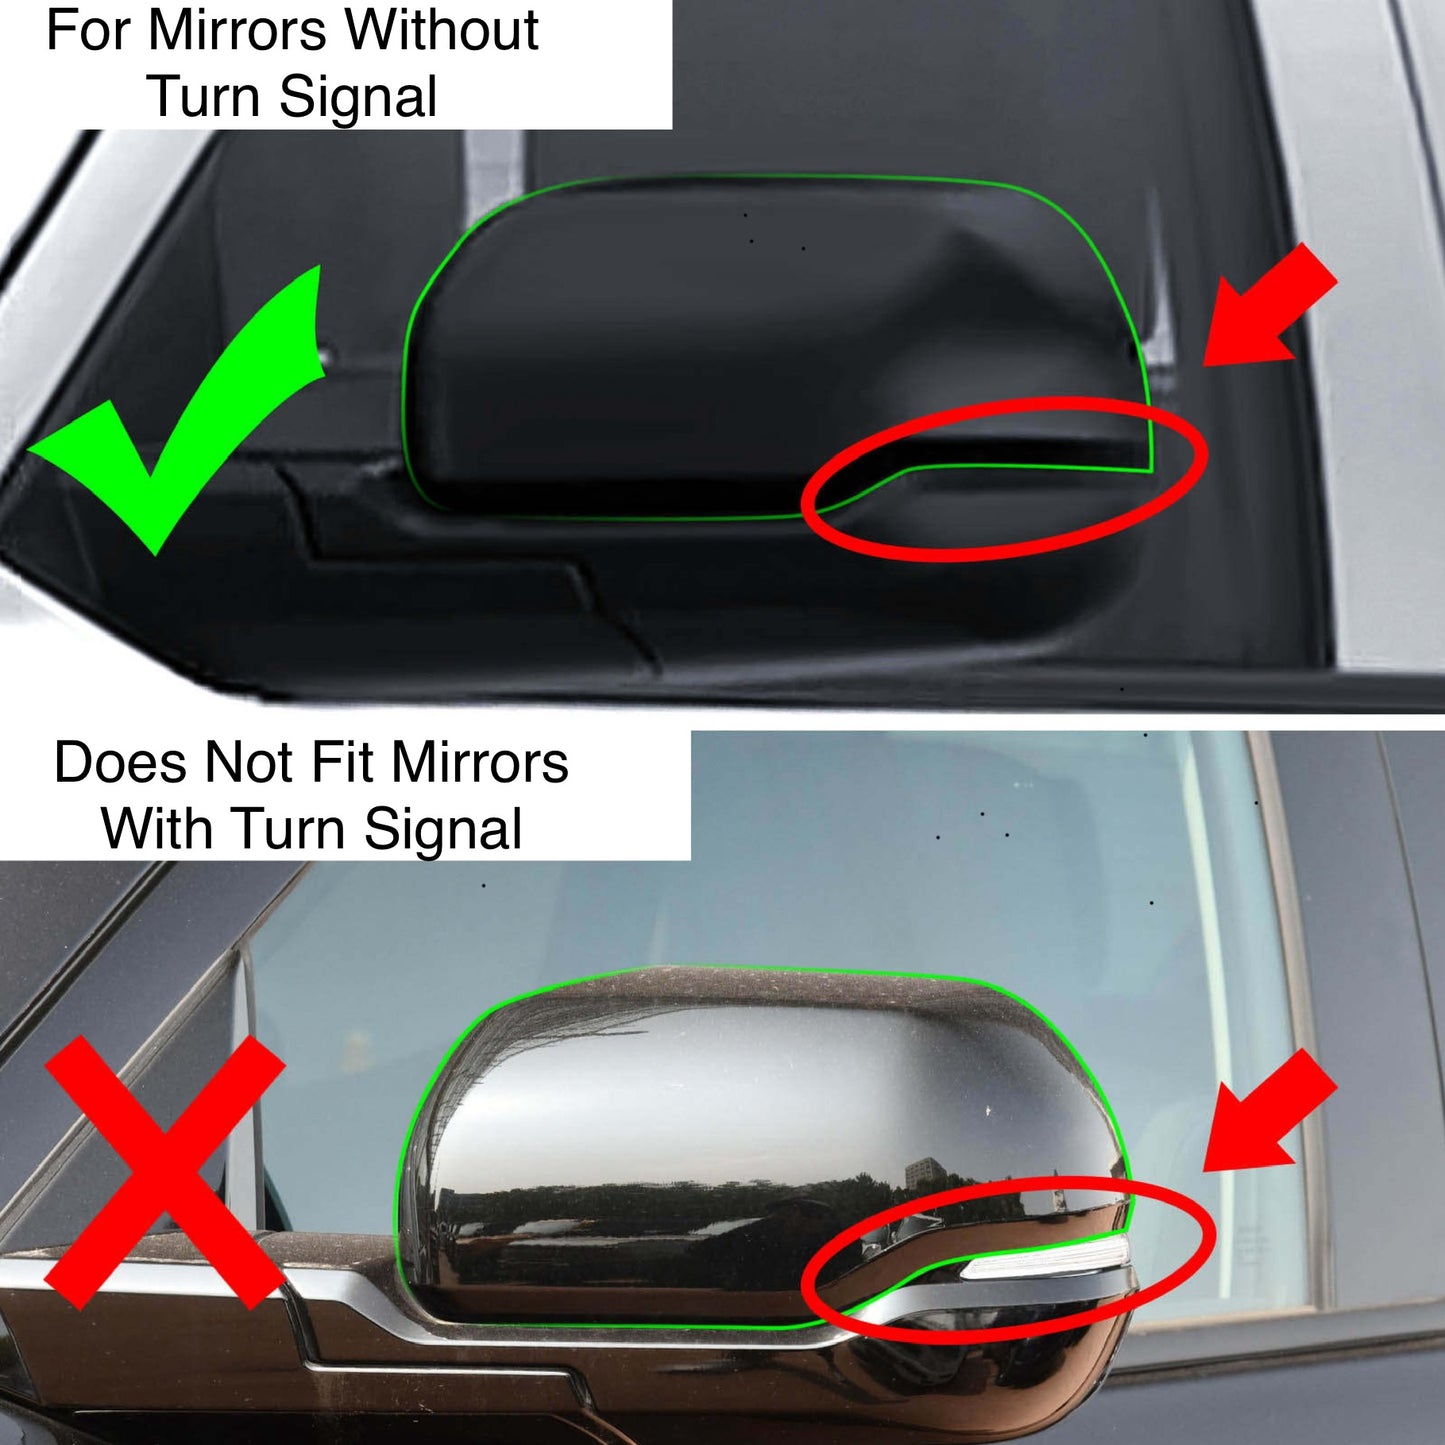 2022+ Tundra Mirror Covers, Mirror WITHOUT Turnsignal Version